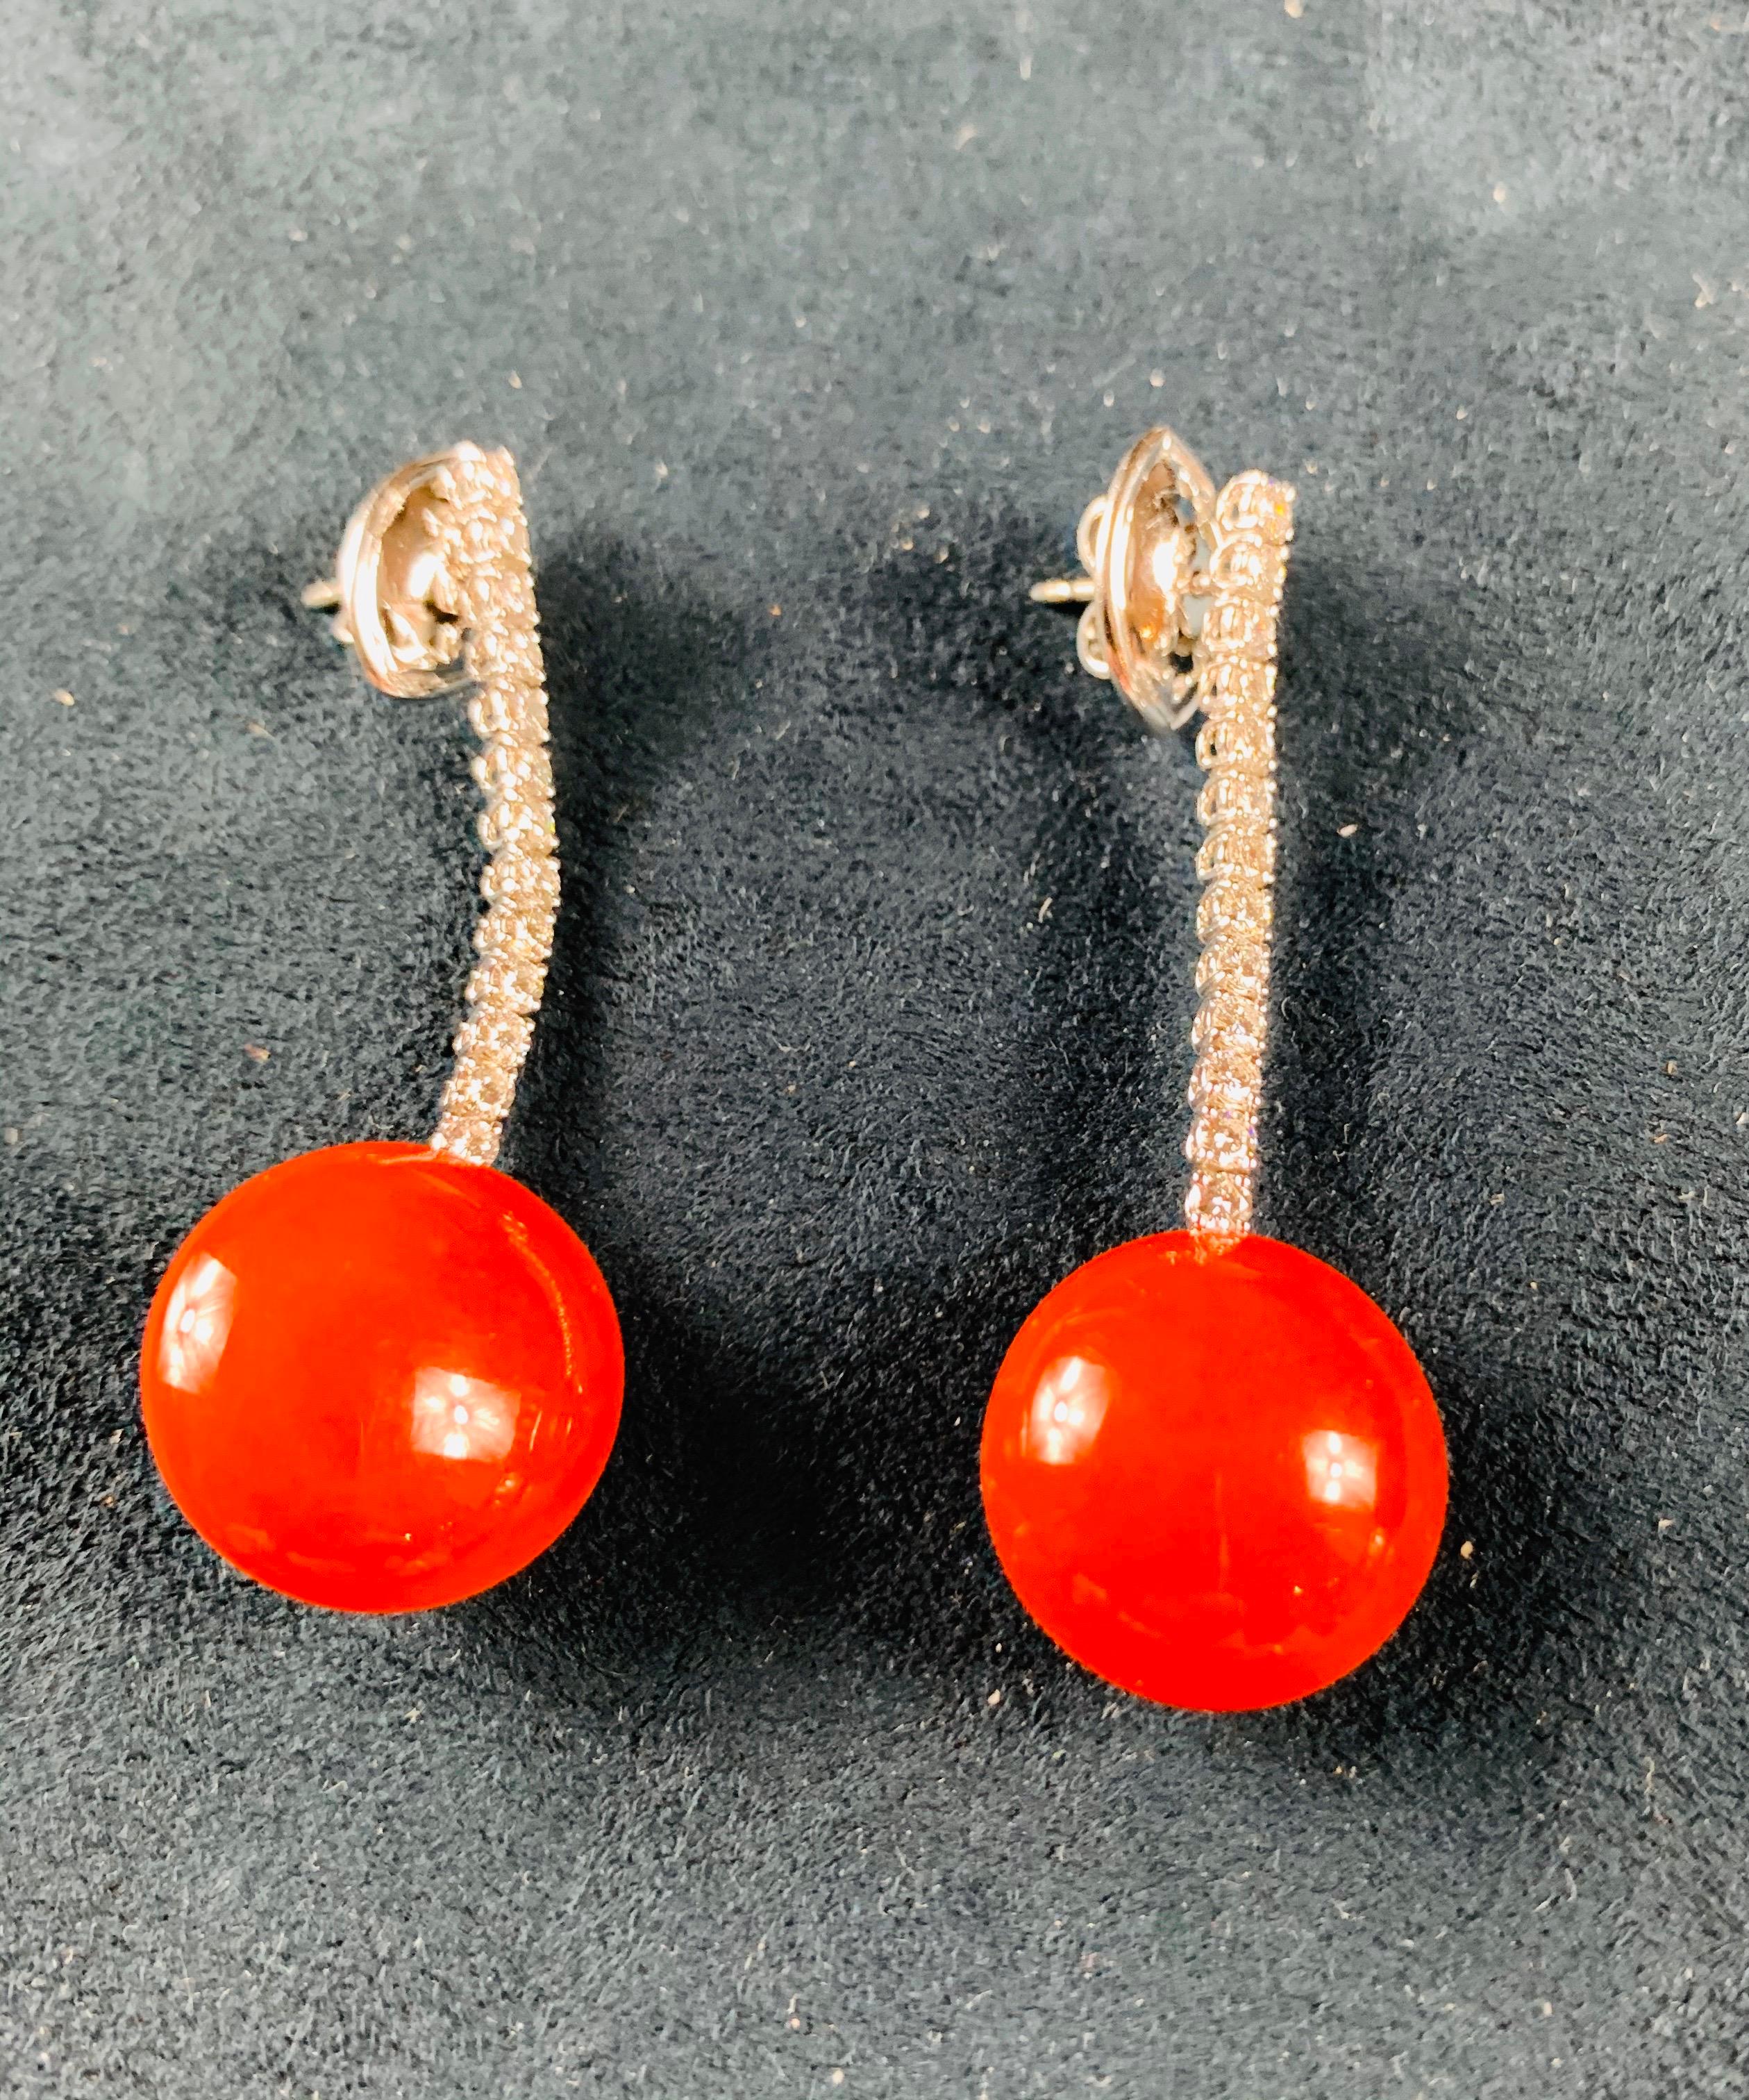 A Beautiful Very Rare And Elegant 18 Carat White Gold Pair Of Drop Red Coral Earrings With One Row Of Diamond Pave Claw Set .  ( 1 Carat GH-VS1)